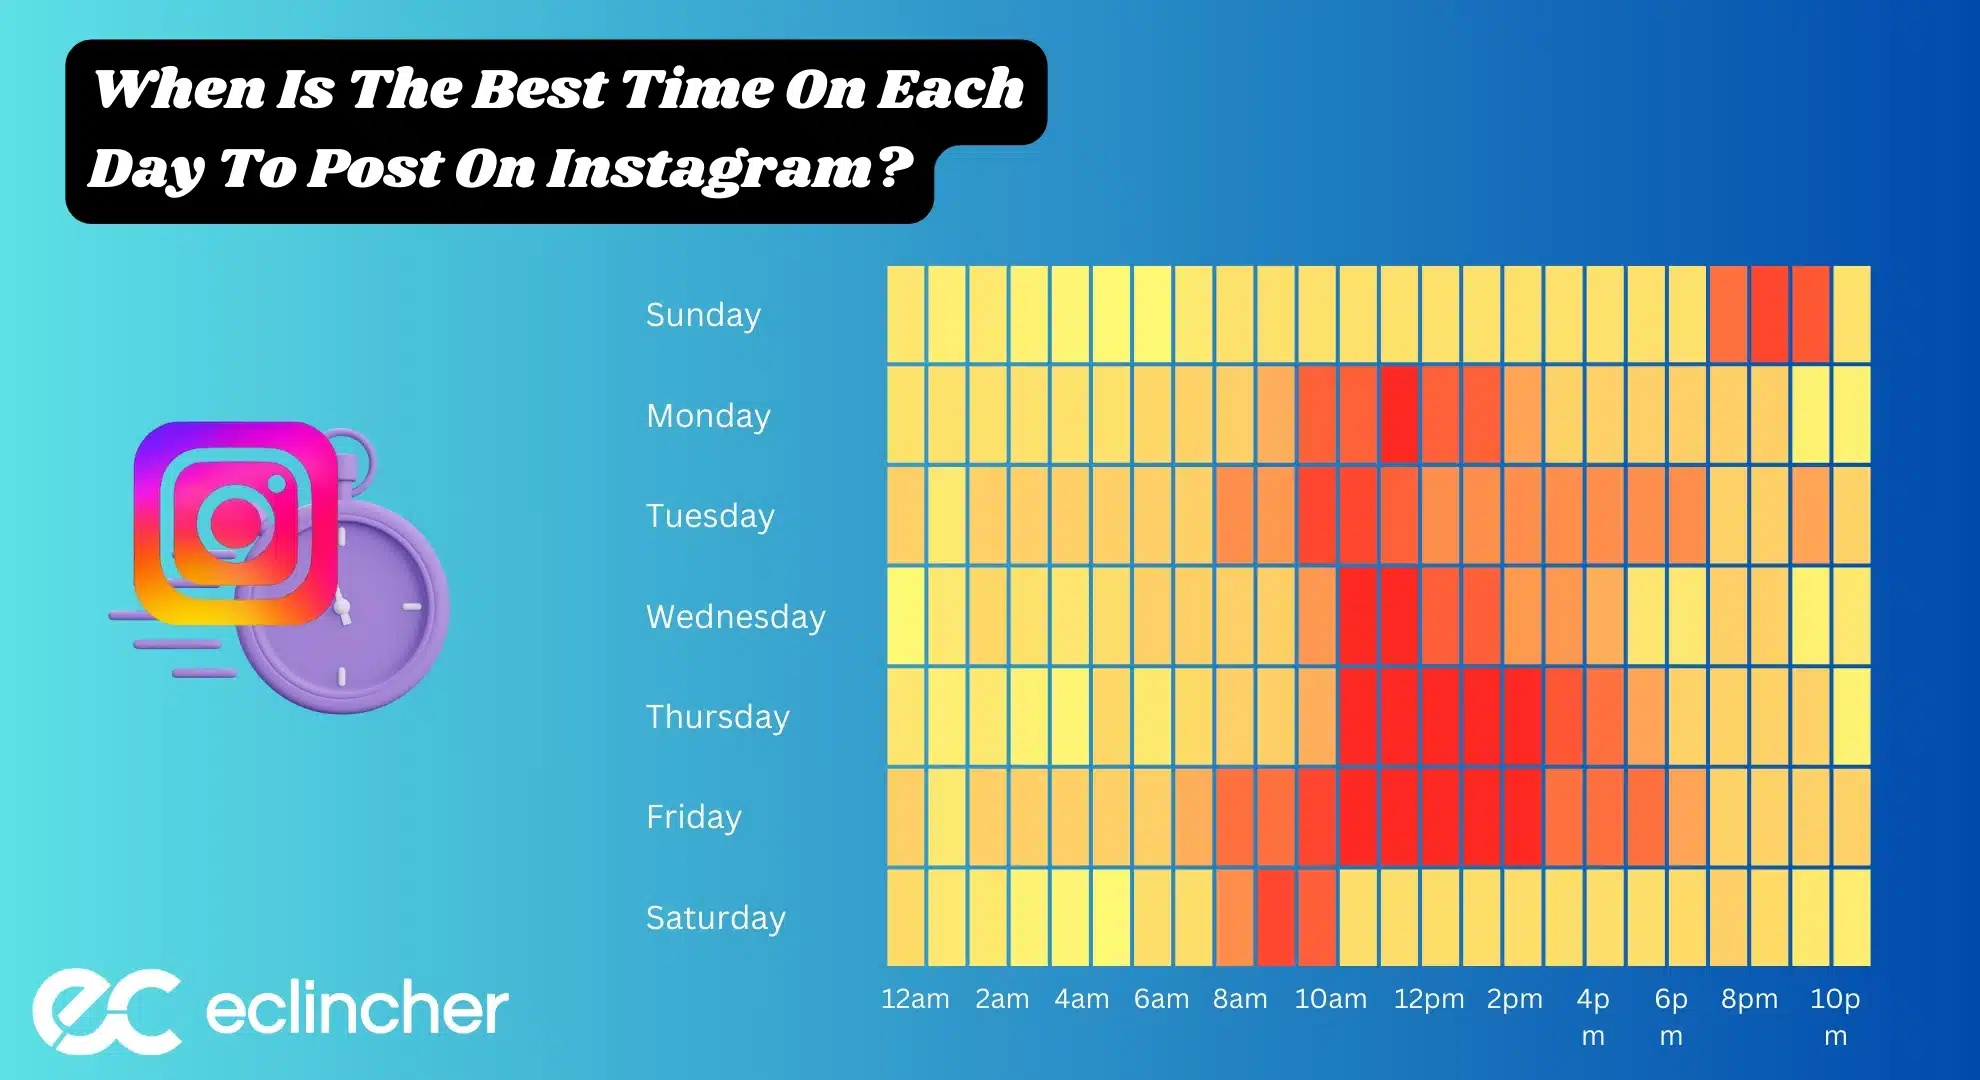 When Is The Best Time On Each Day To Post On Instagram